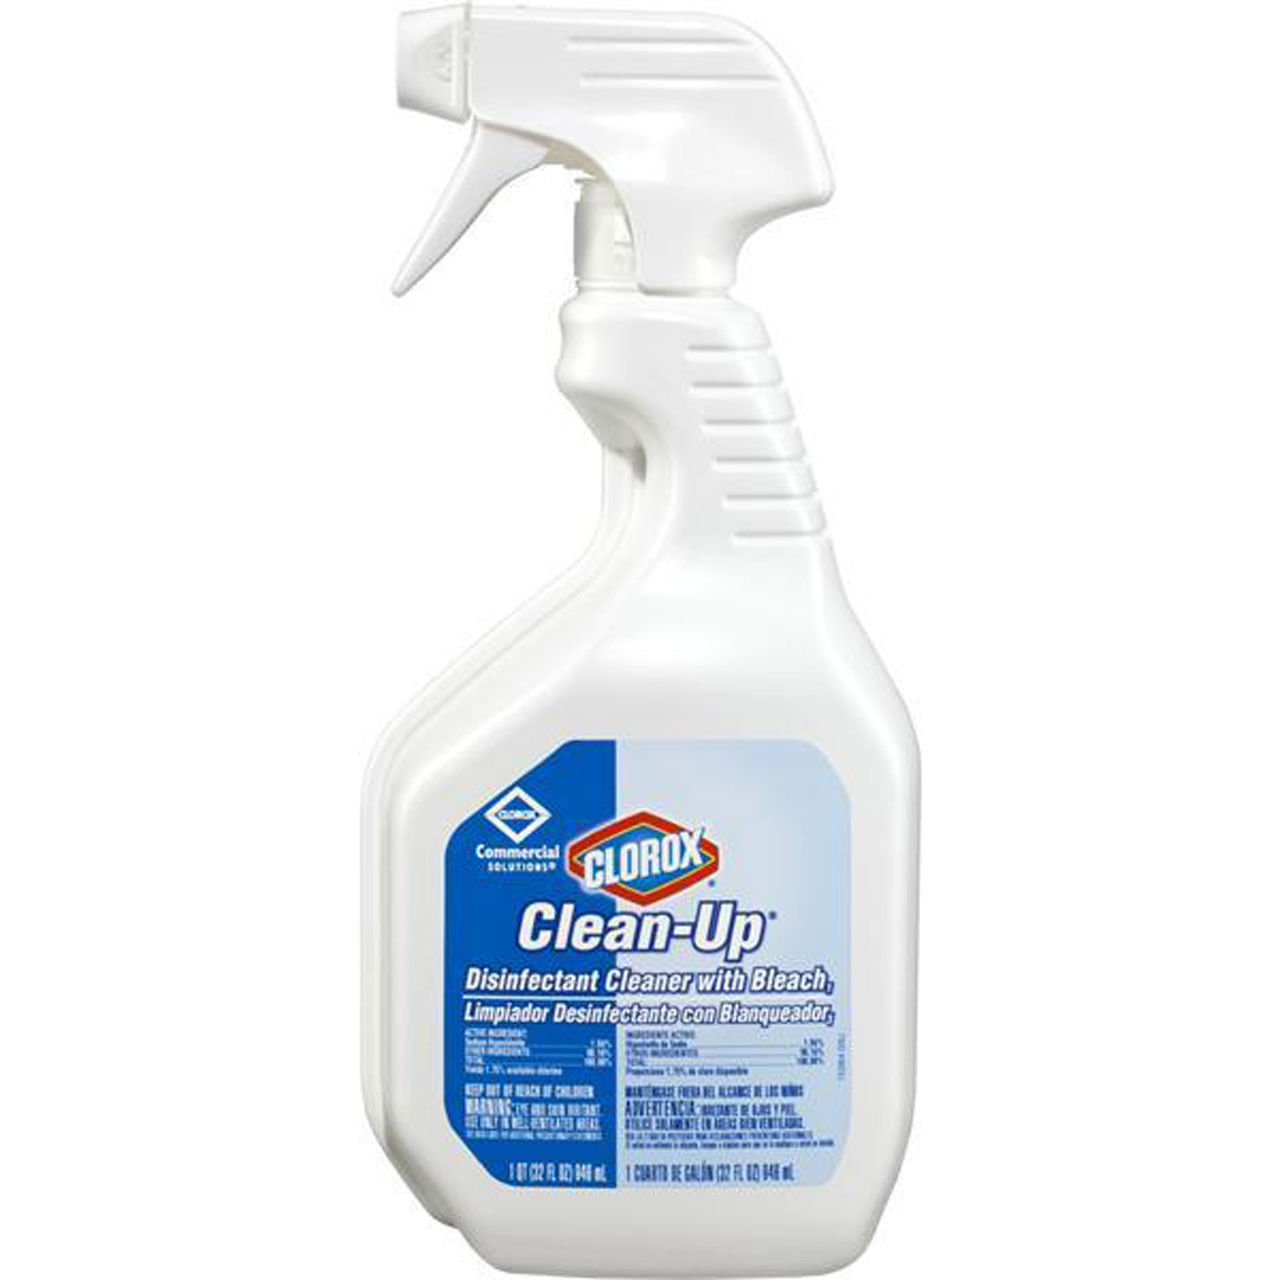 What is the purpose of Clorox Clean-Up, the disinfectant spray cleaner with bleach?